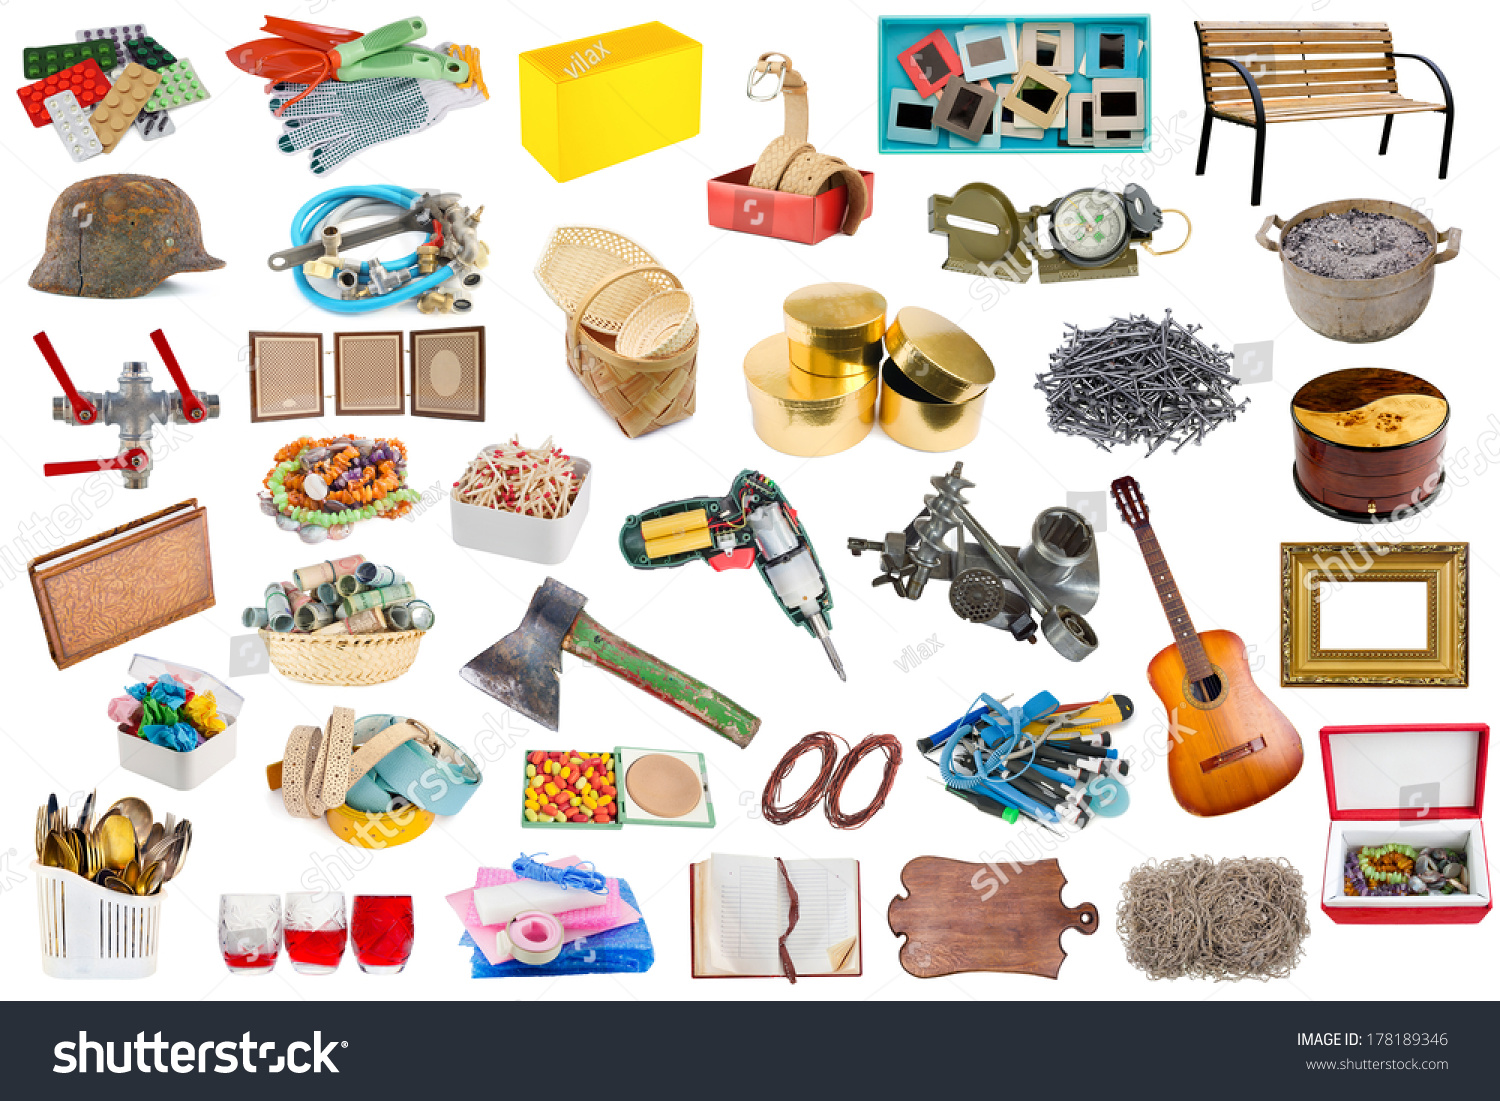 Simple Common Household Objects Tools Isolated Stock Photo ...